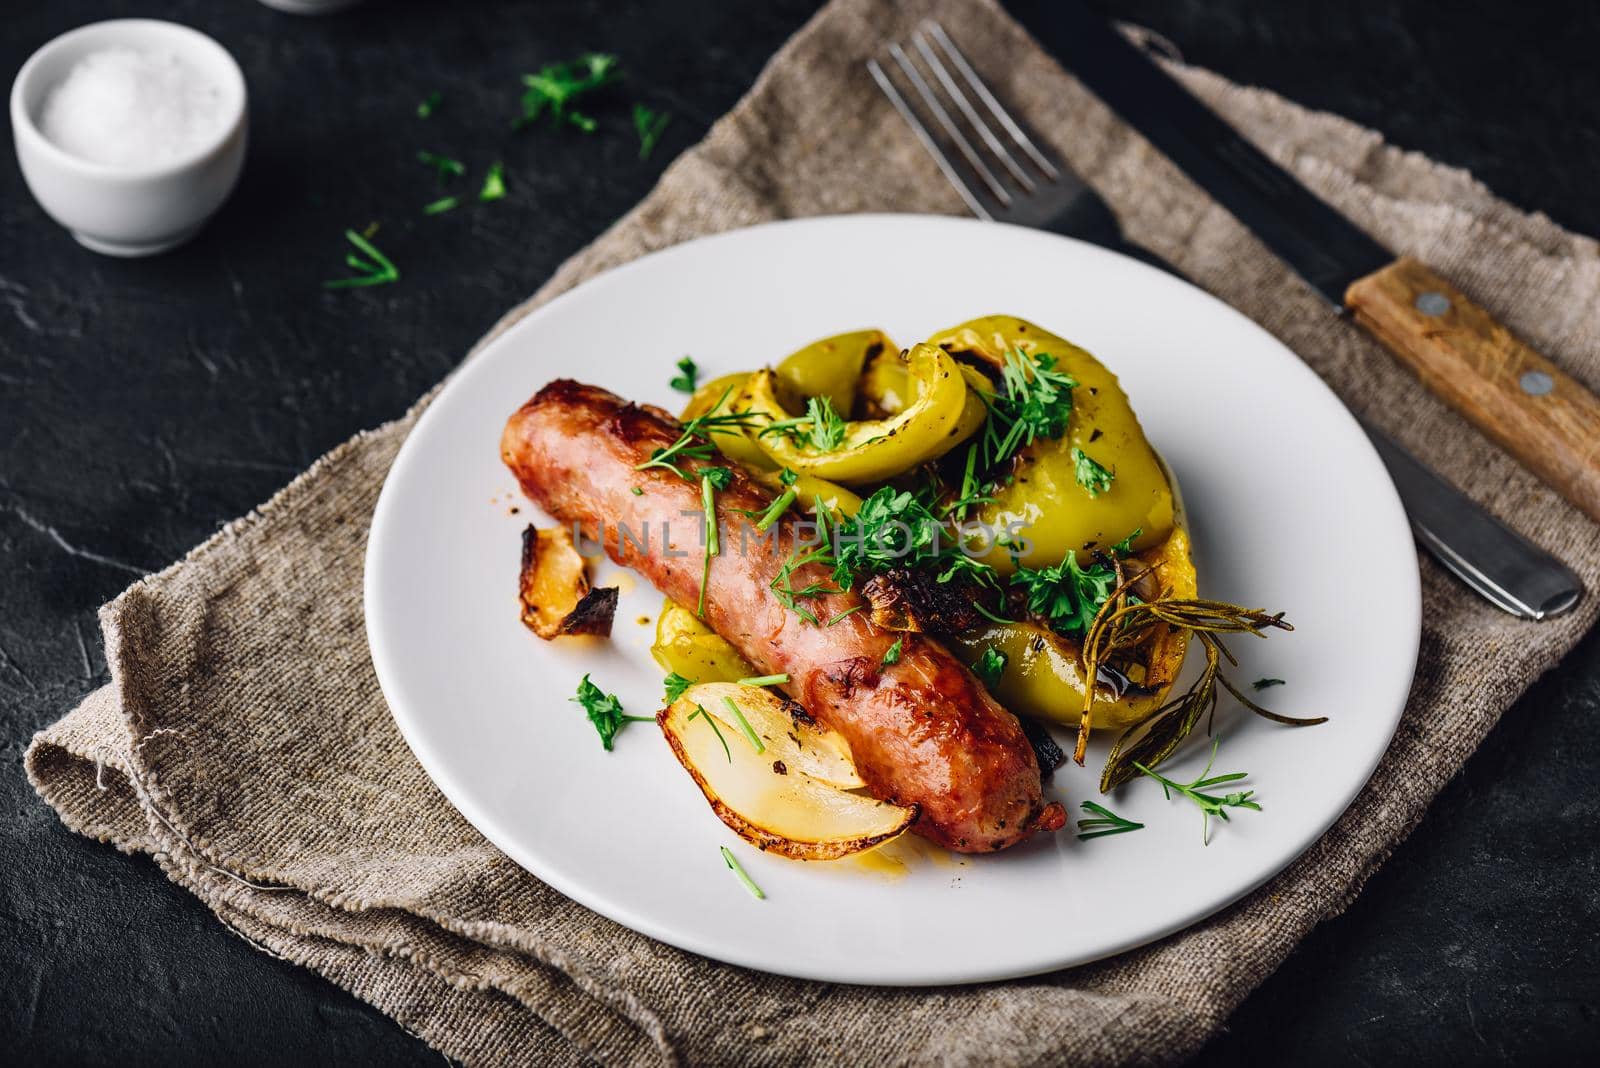 Pork sausage baked with bell peppers, onions and different herbs on white plate